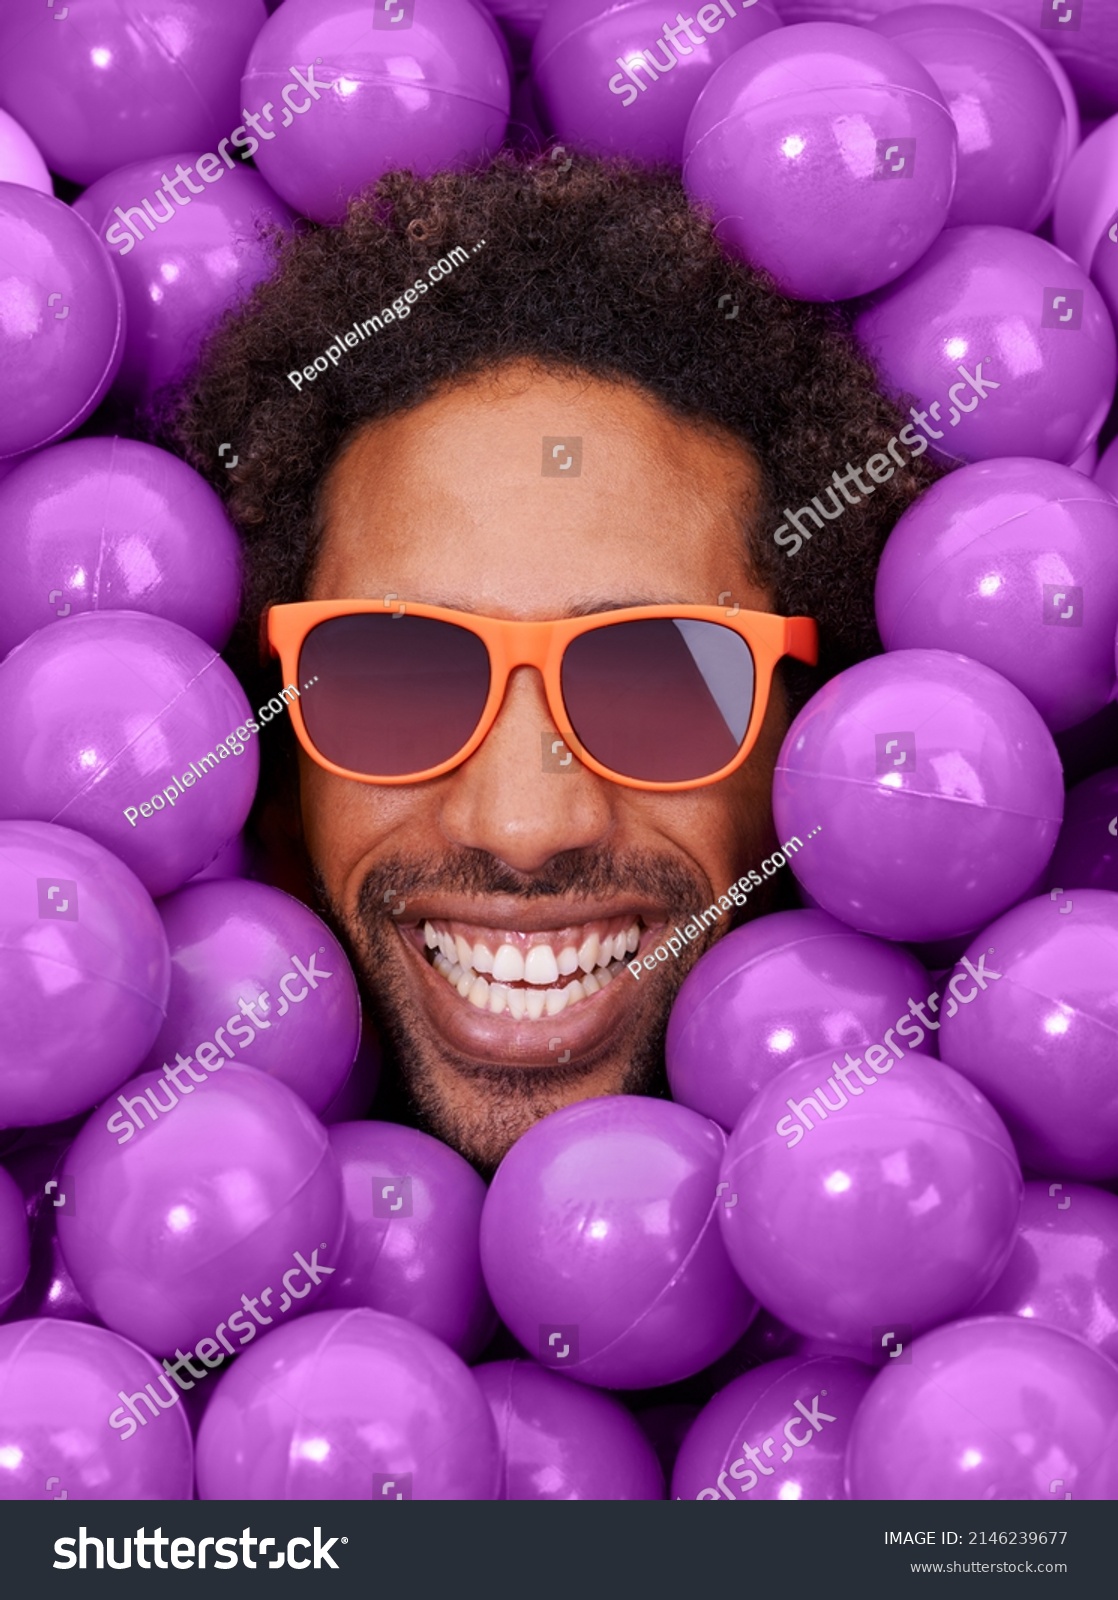 Looking cool and crazy. A young black mans face amongst purple pit balls. #2146239677